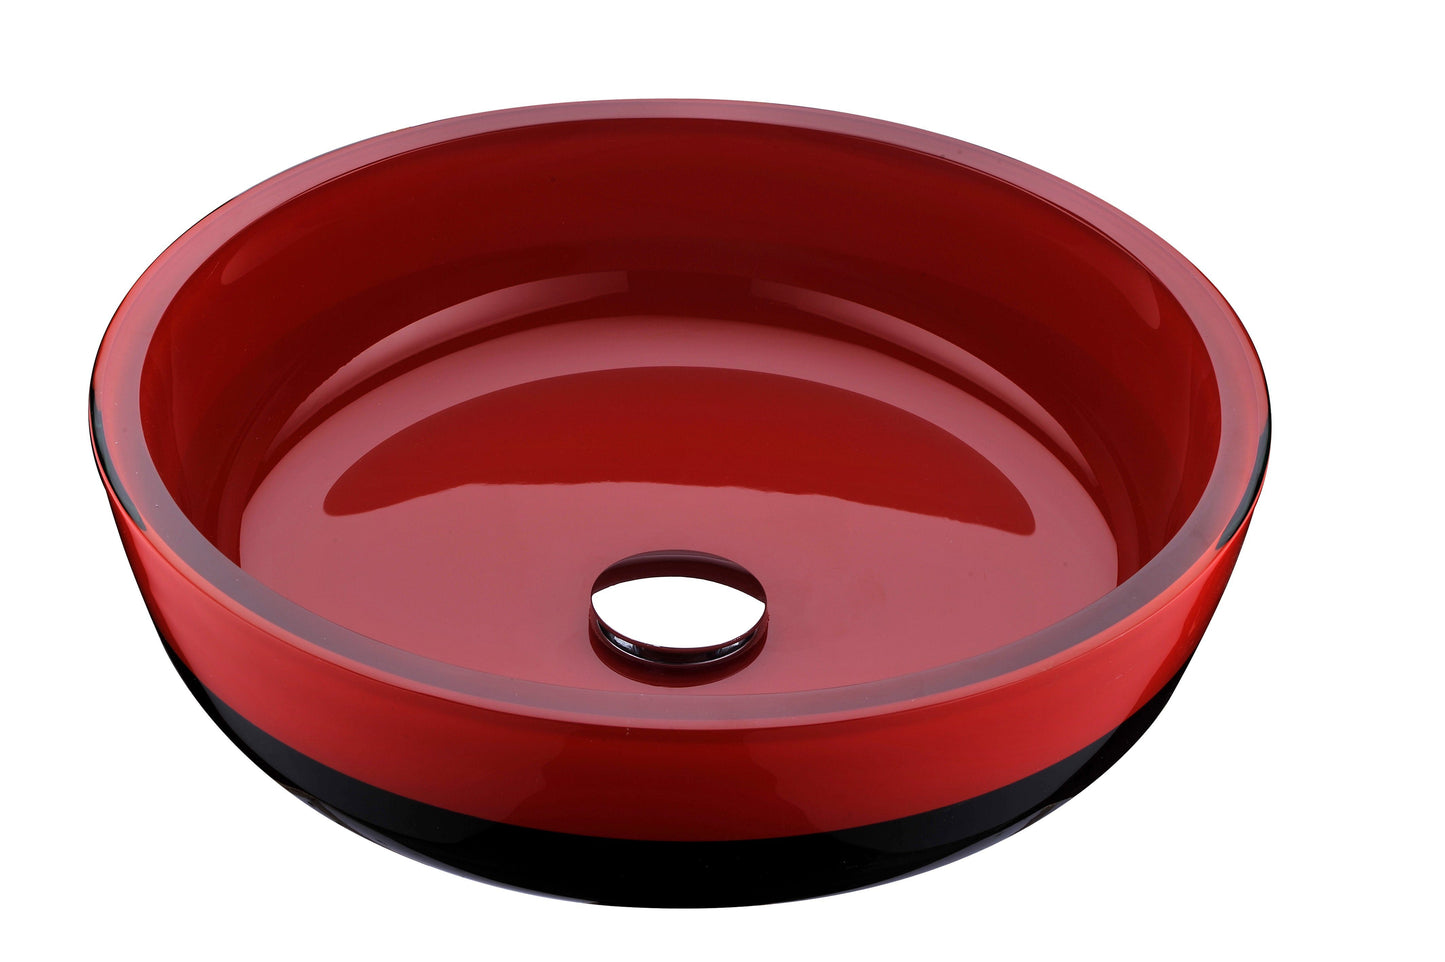 Schnell Deco-Glass Vessel Sink in Lustrous Red and Black with Harmony Faucet - Luxe Bathroom Vanities